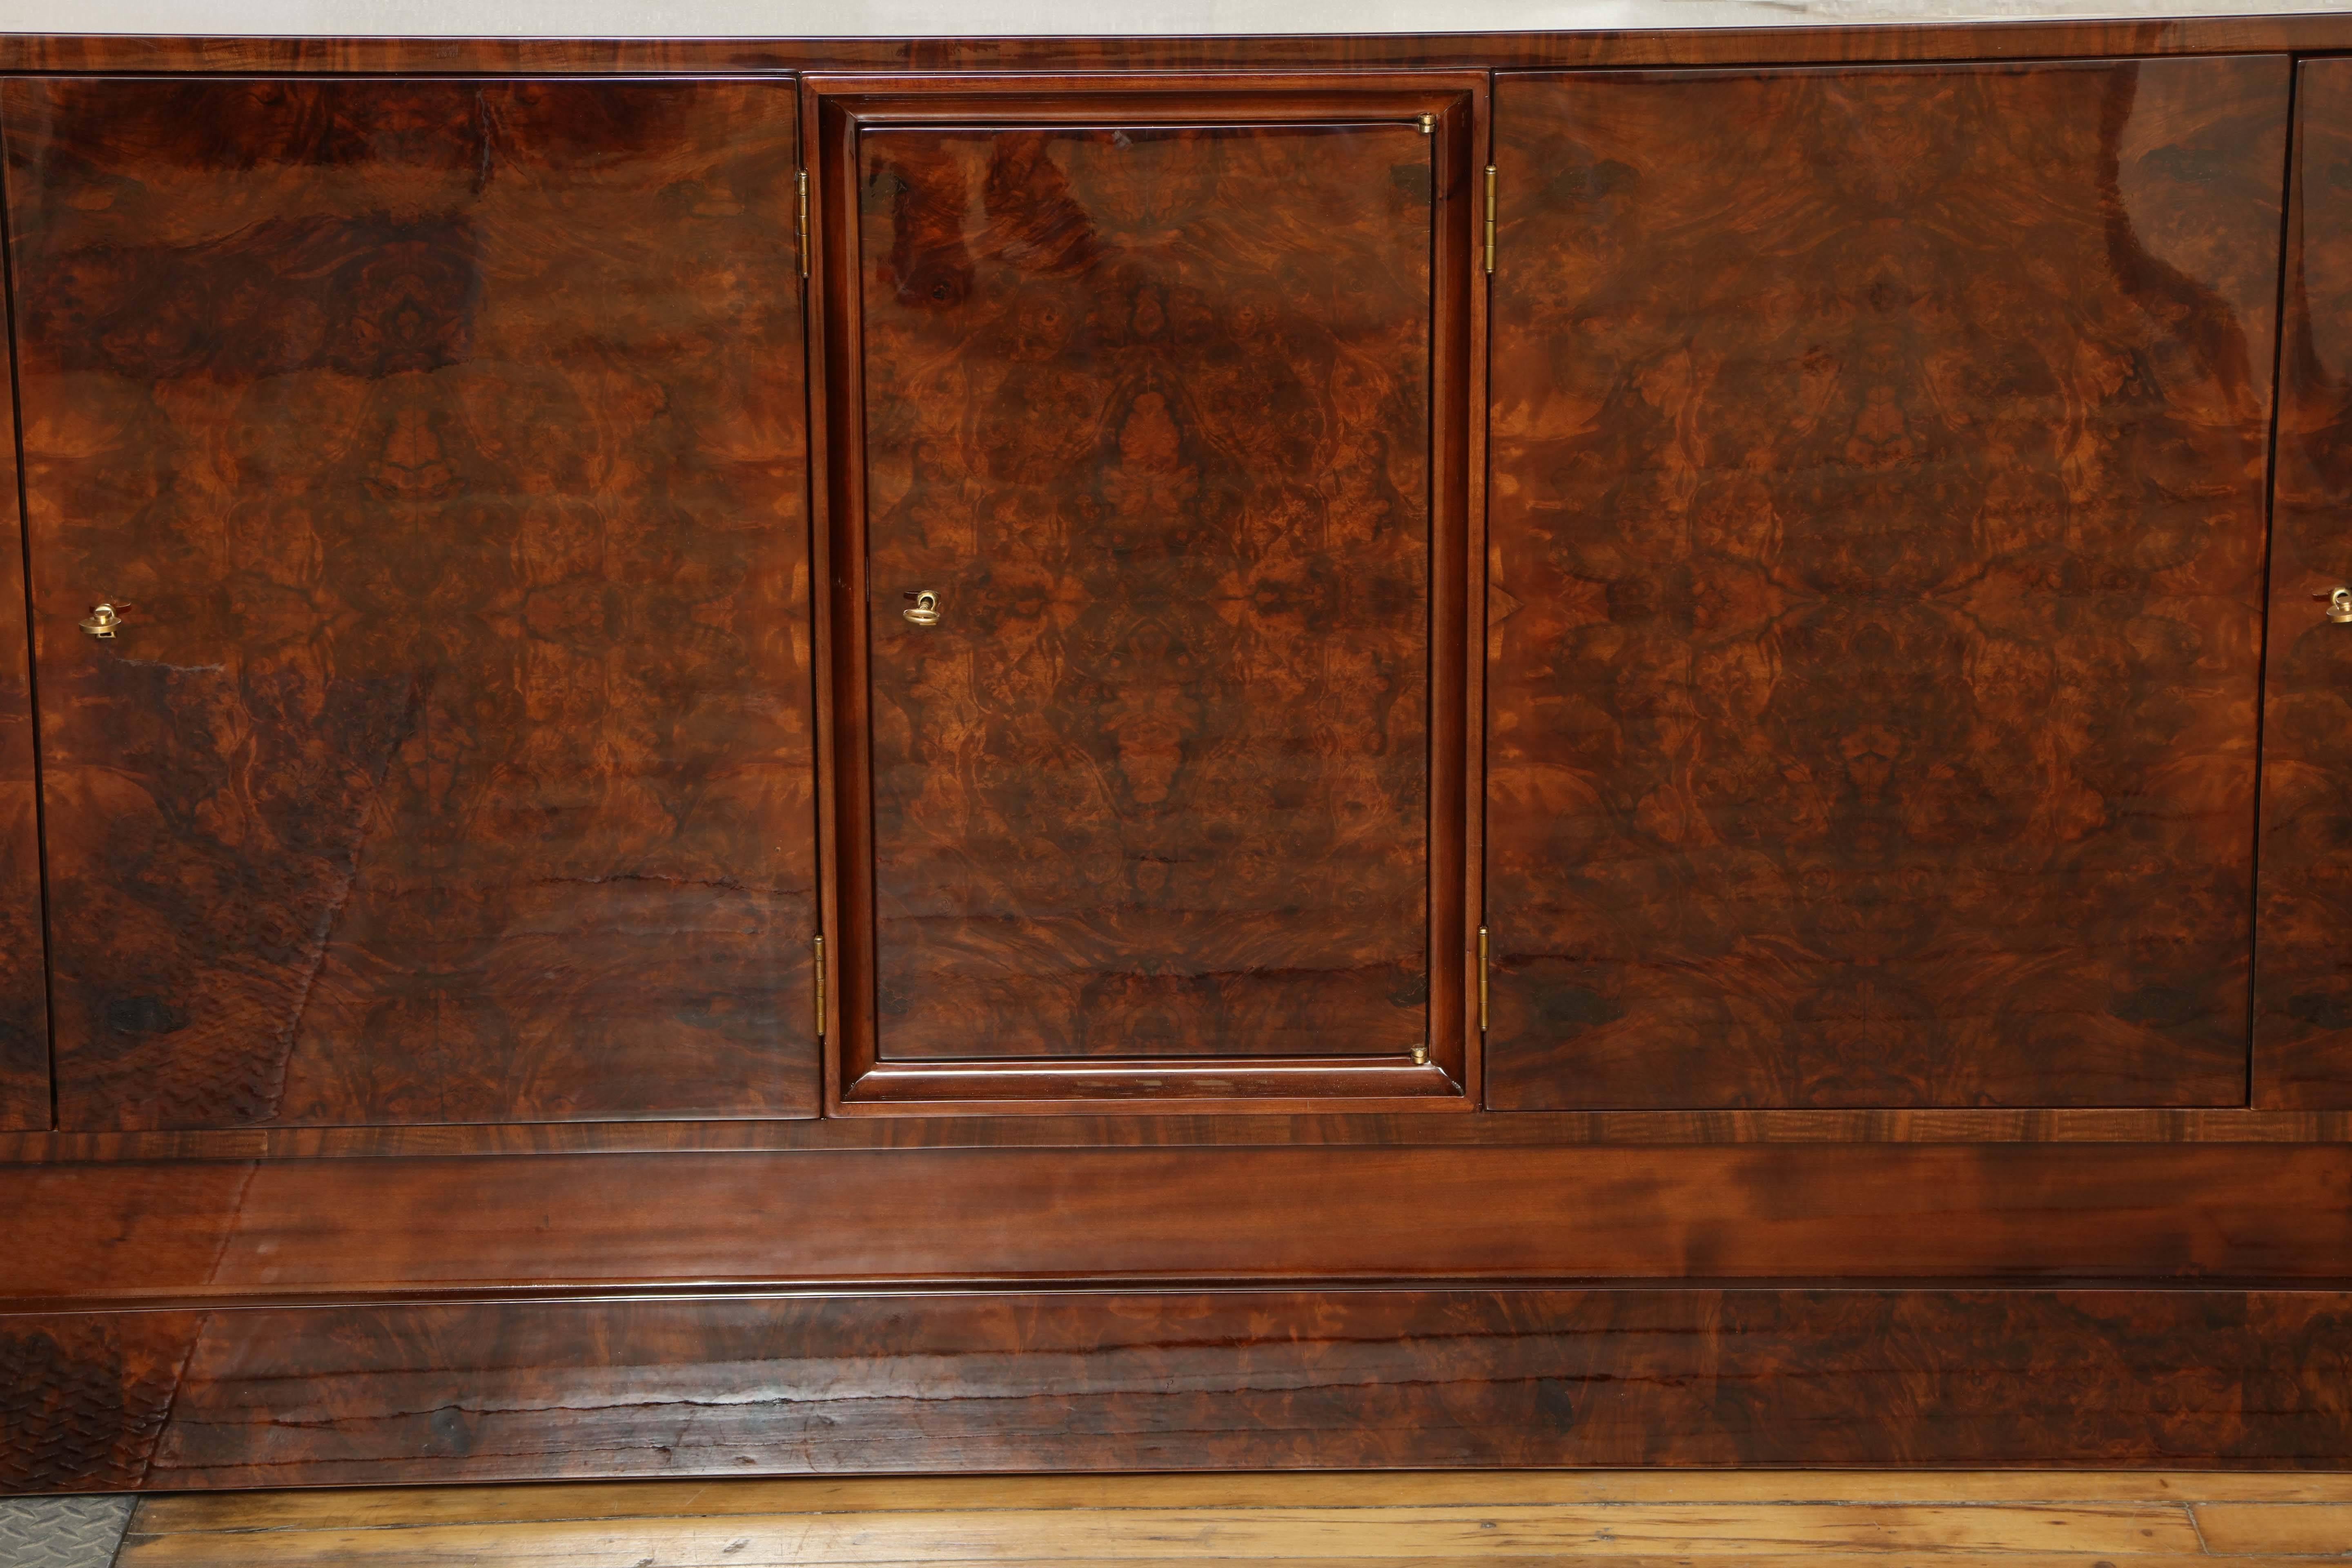 Walnut root wood.
Art Deco sideboard on floating base.
Ample storage space with multiple drawers and shelves inside.